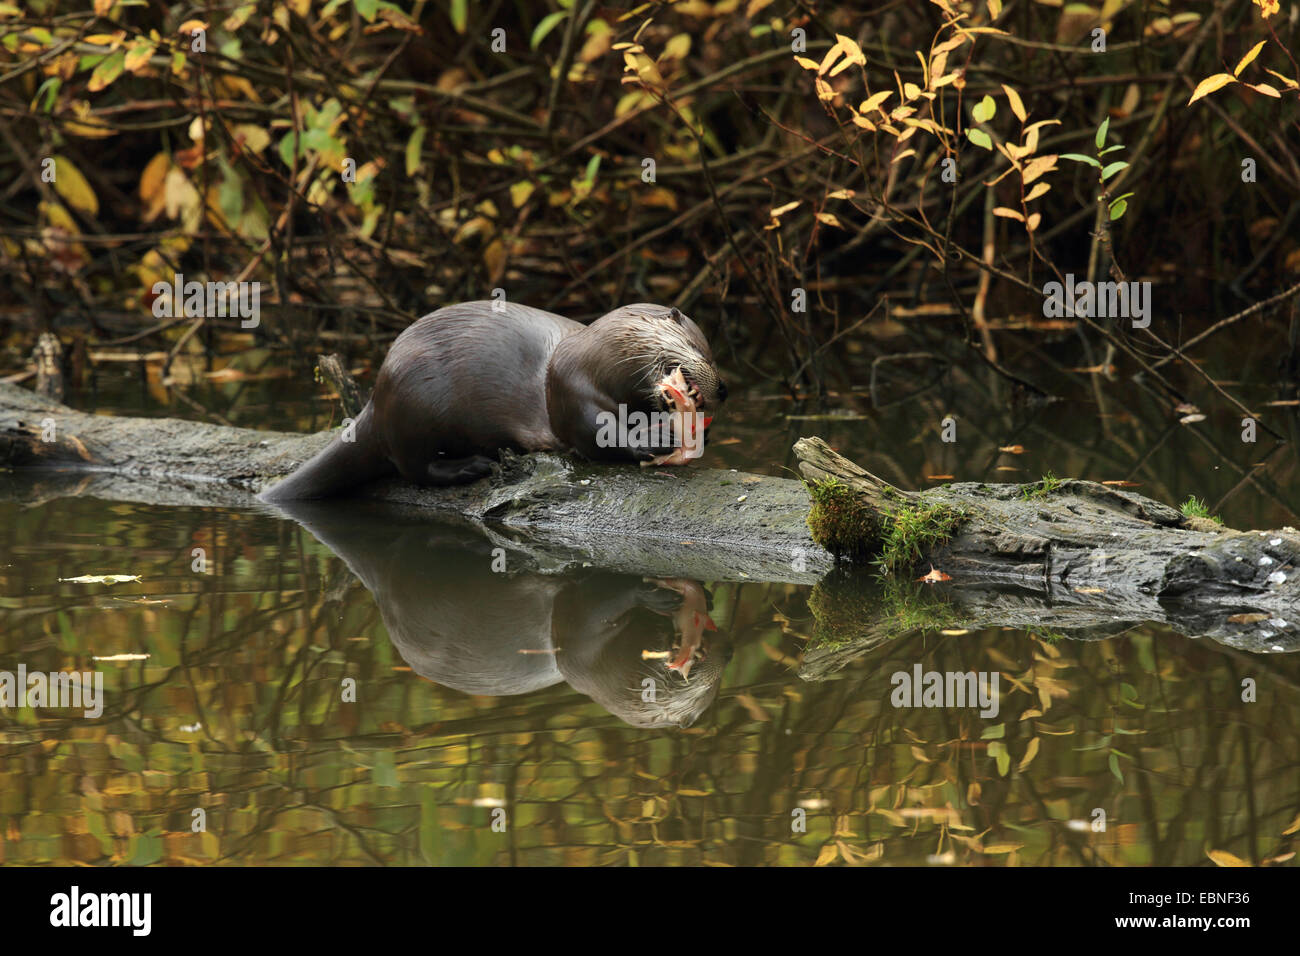 European river otter, European Otter, Eurasian Otter (Lutra lutra), eating fish on a tree trunk at the water surface, Germany, Saxony Stock Photo